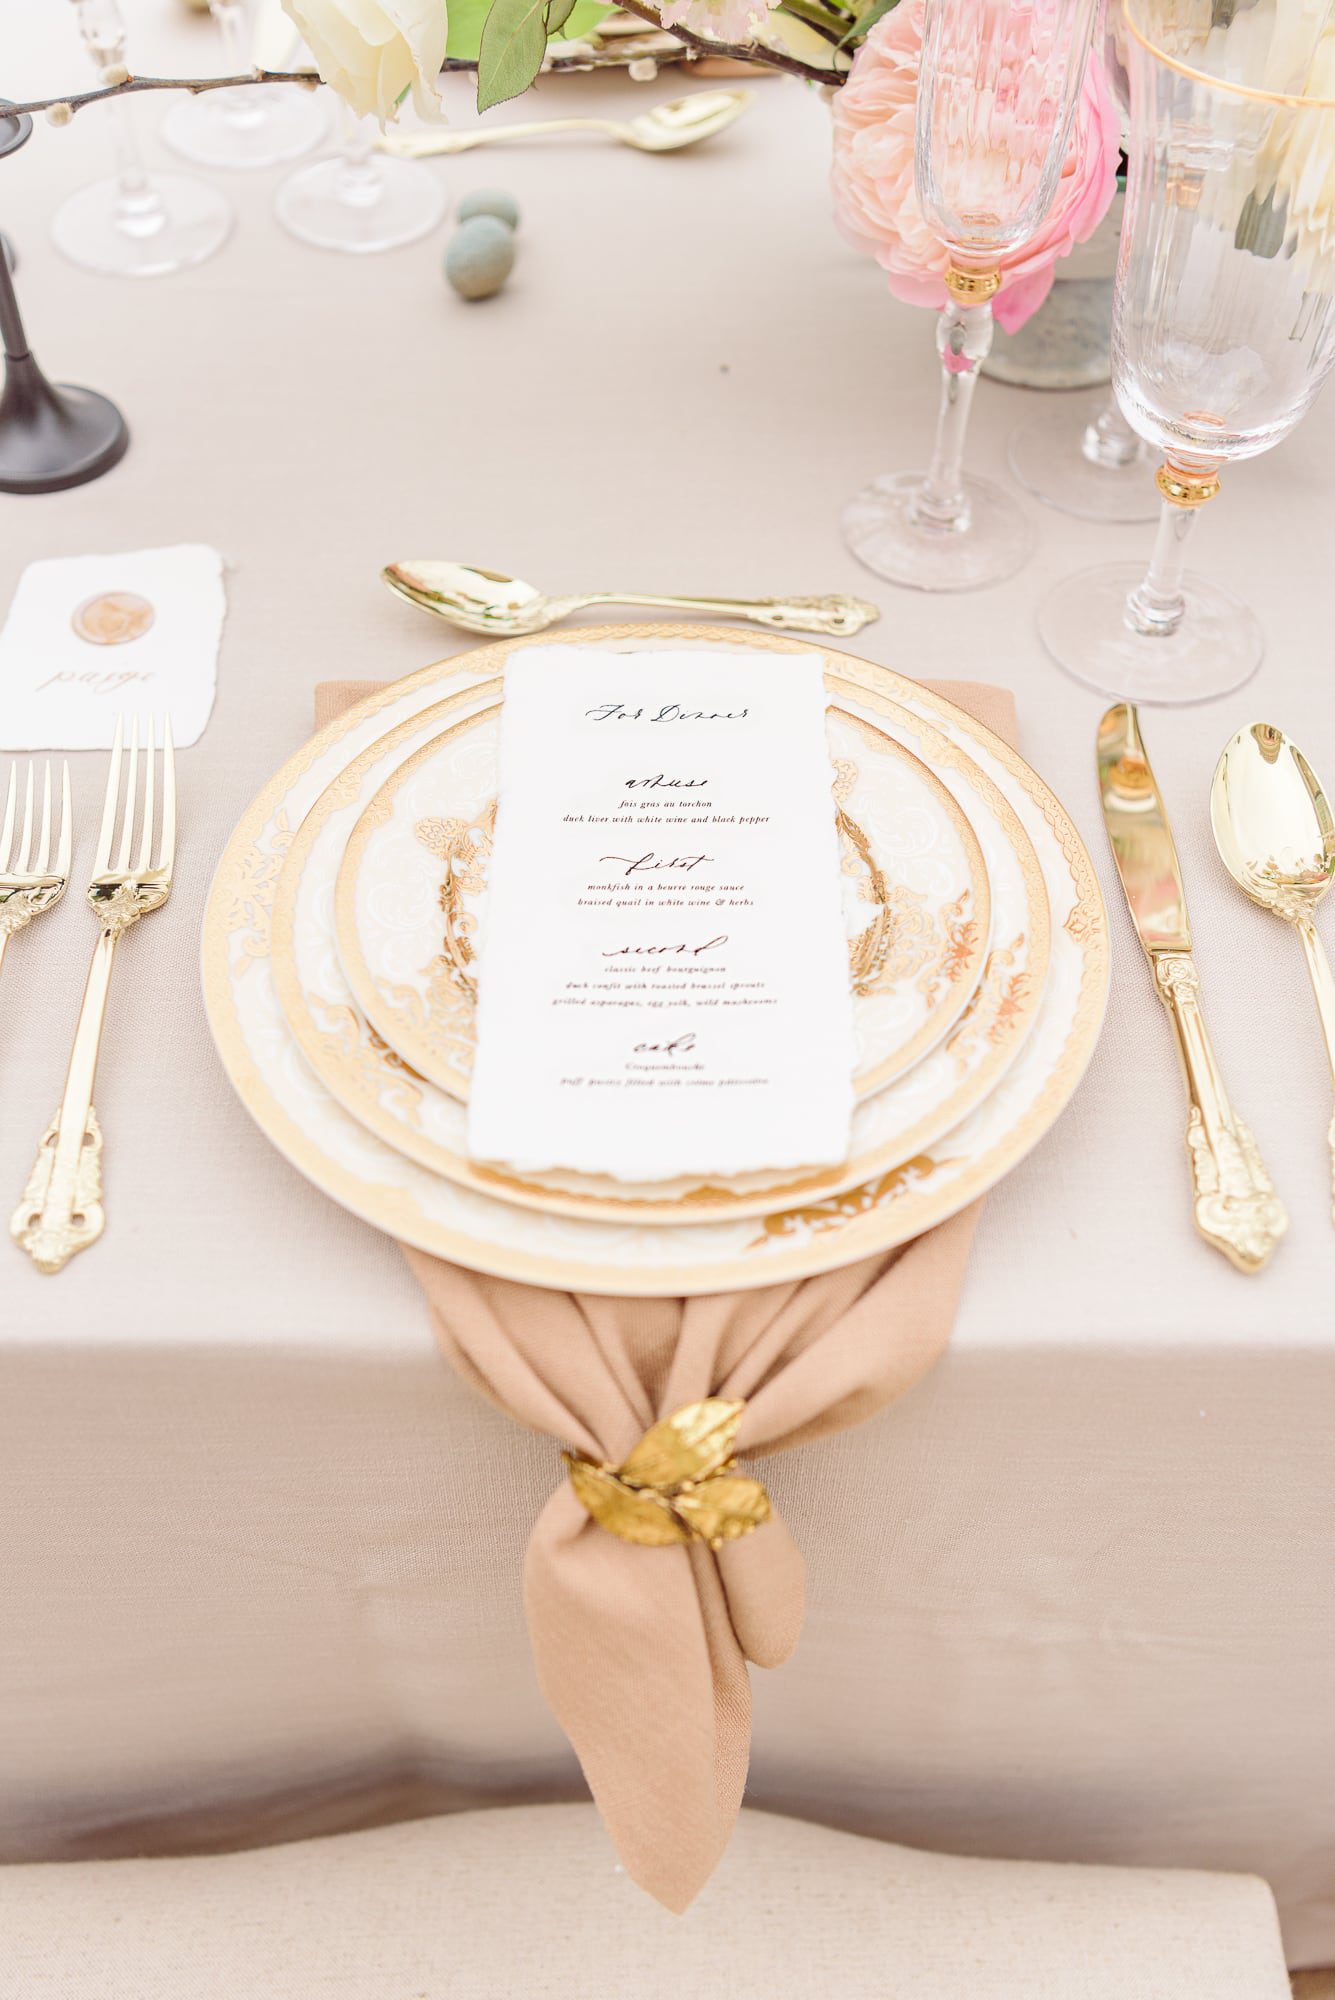 Idea for an outdoor wedding place setting with beige and gold.